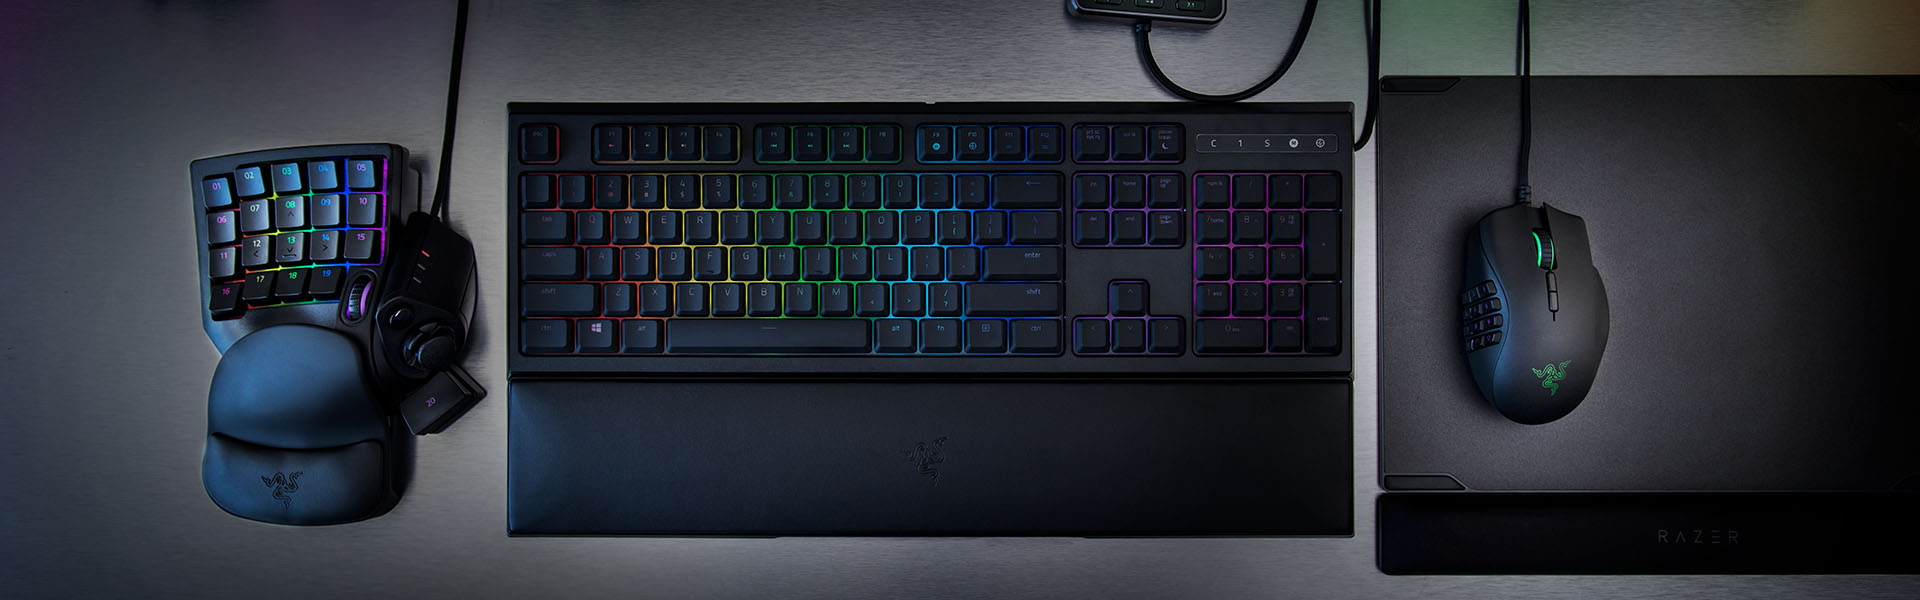 Razer Introduces More Ways to Customize with New Mouse & Keypad 24